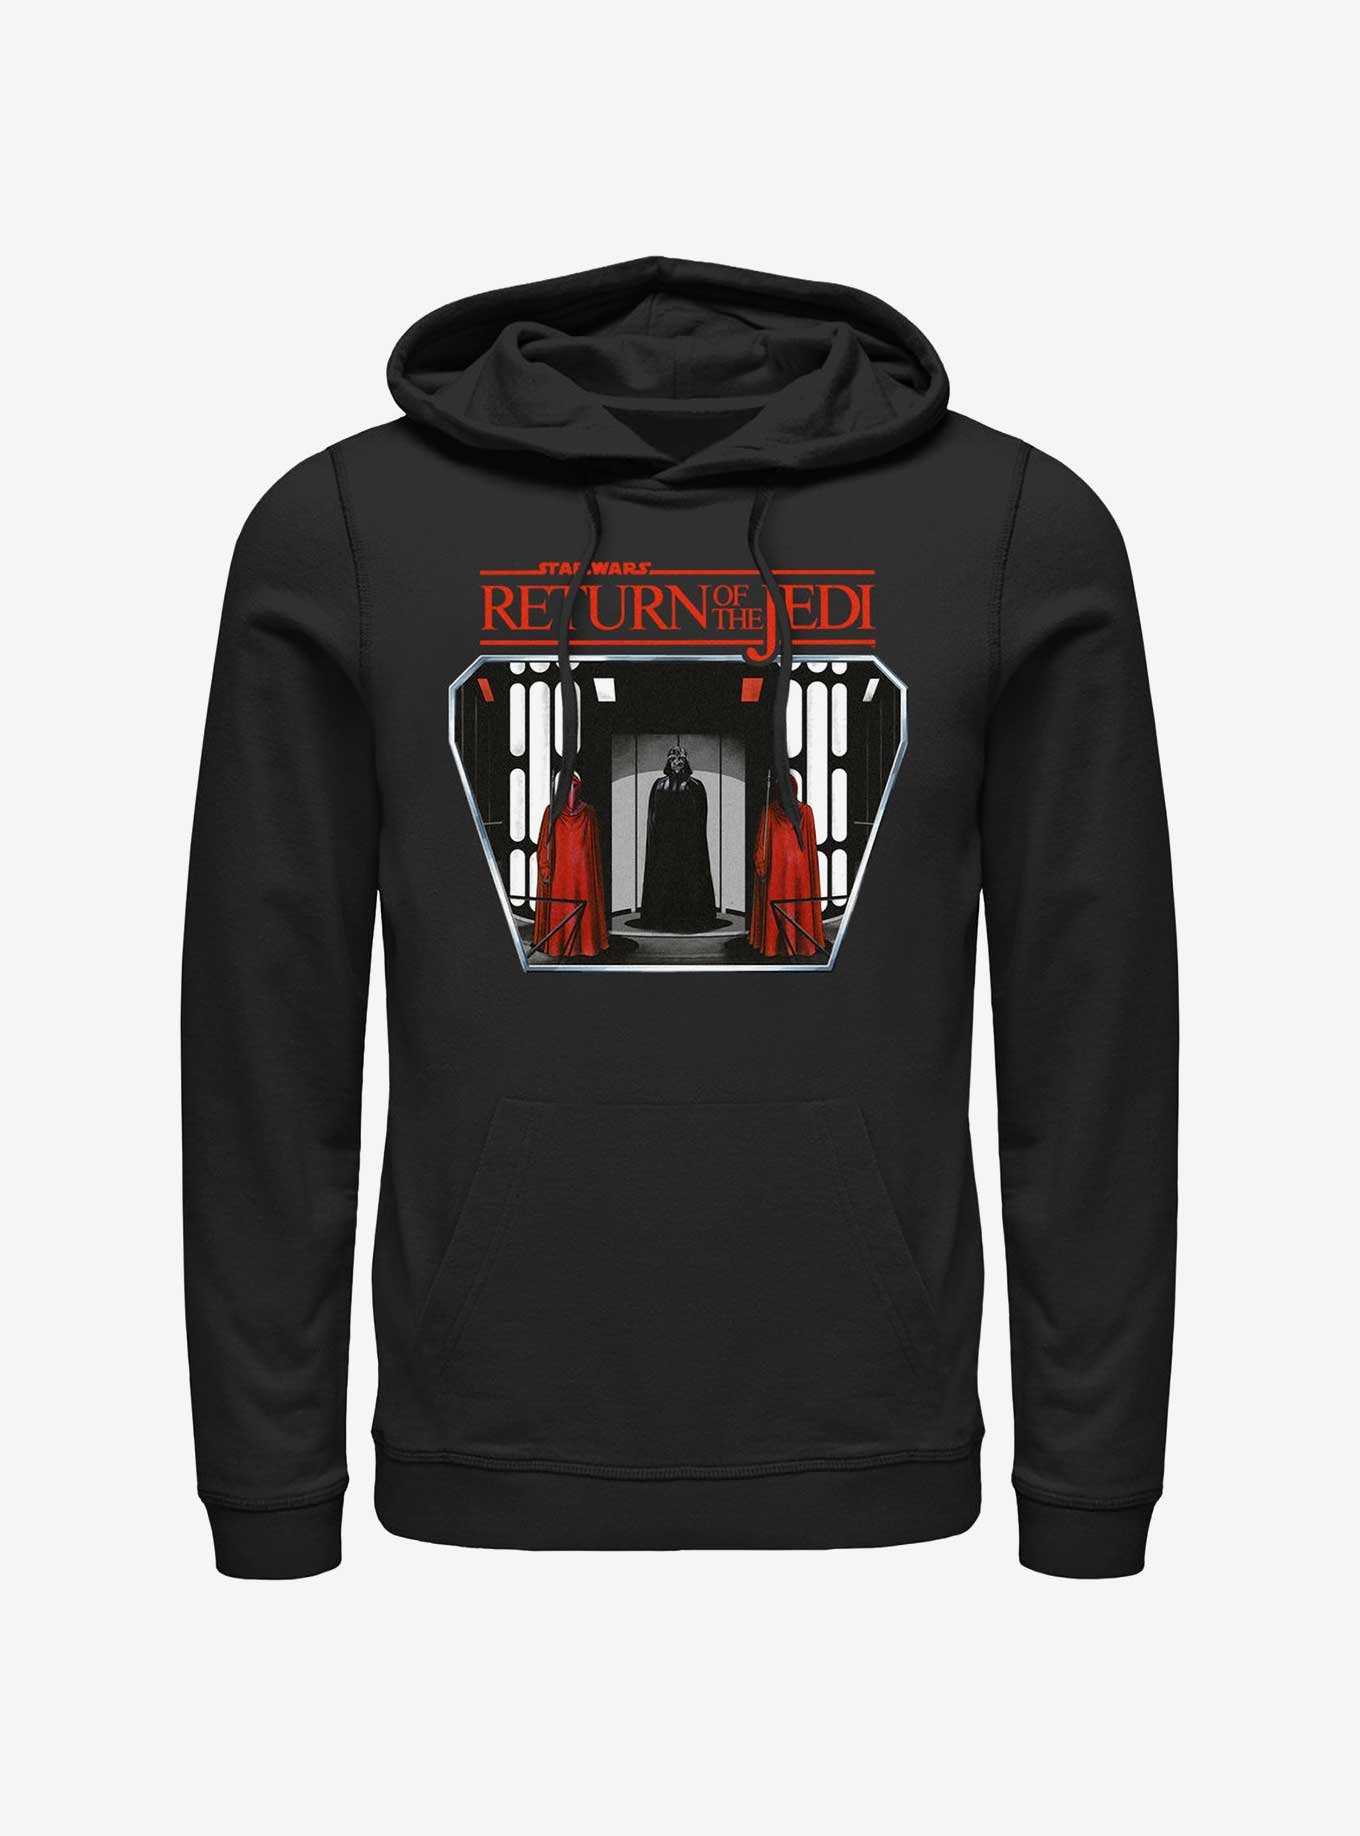 Star Wars Return of the Jedi 40th Anniversary Darth Vader and Royal Guards Hoodie, , hi-res